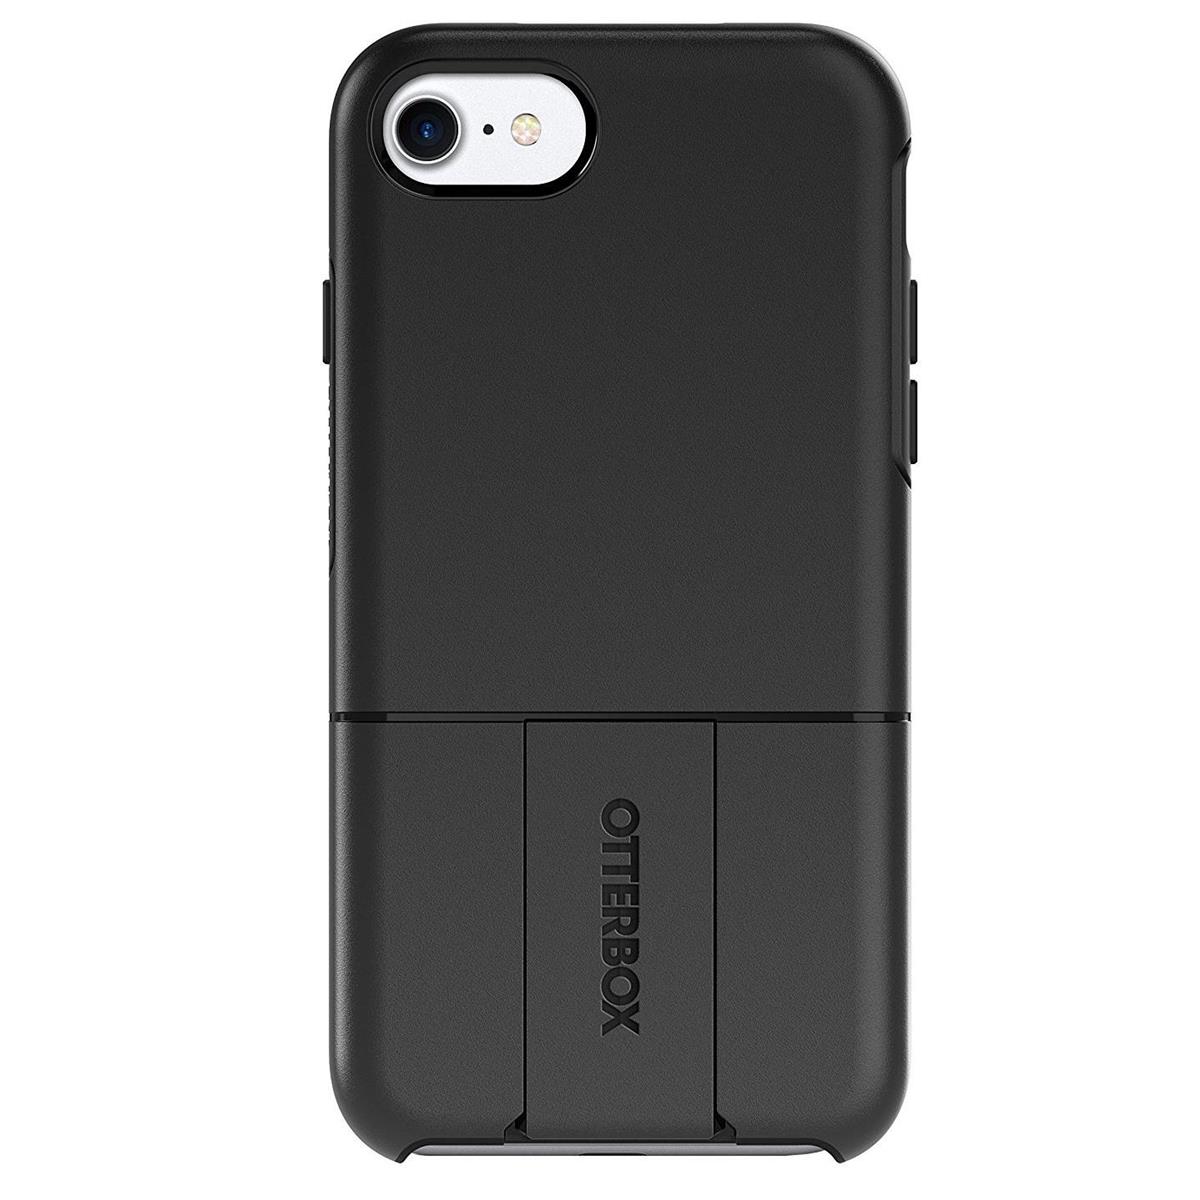 Photos - Case OtterBox UniVERSE Module  for iPhone 7/ iPhone 8 - Black 77-56783 